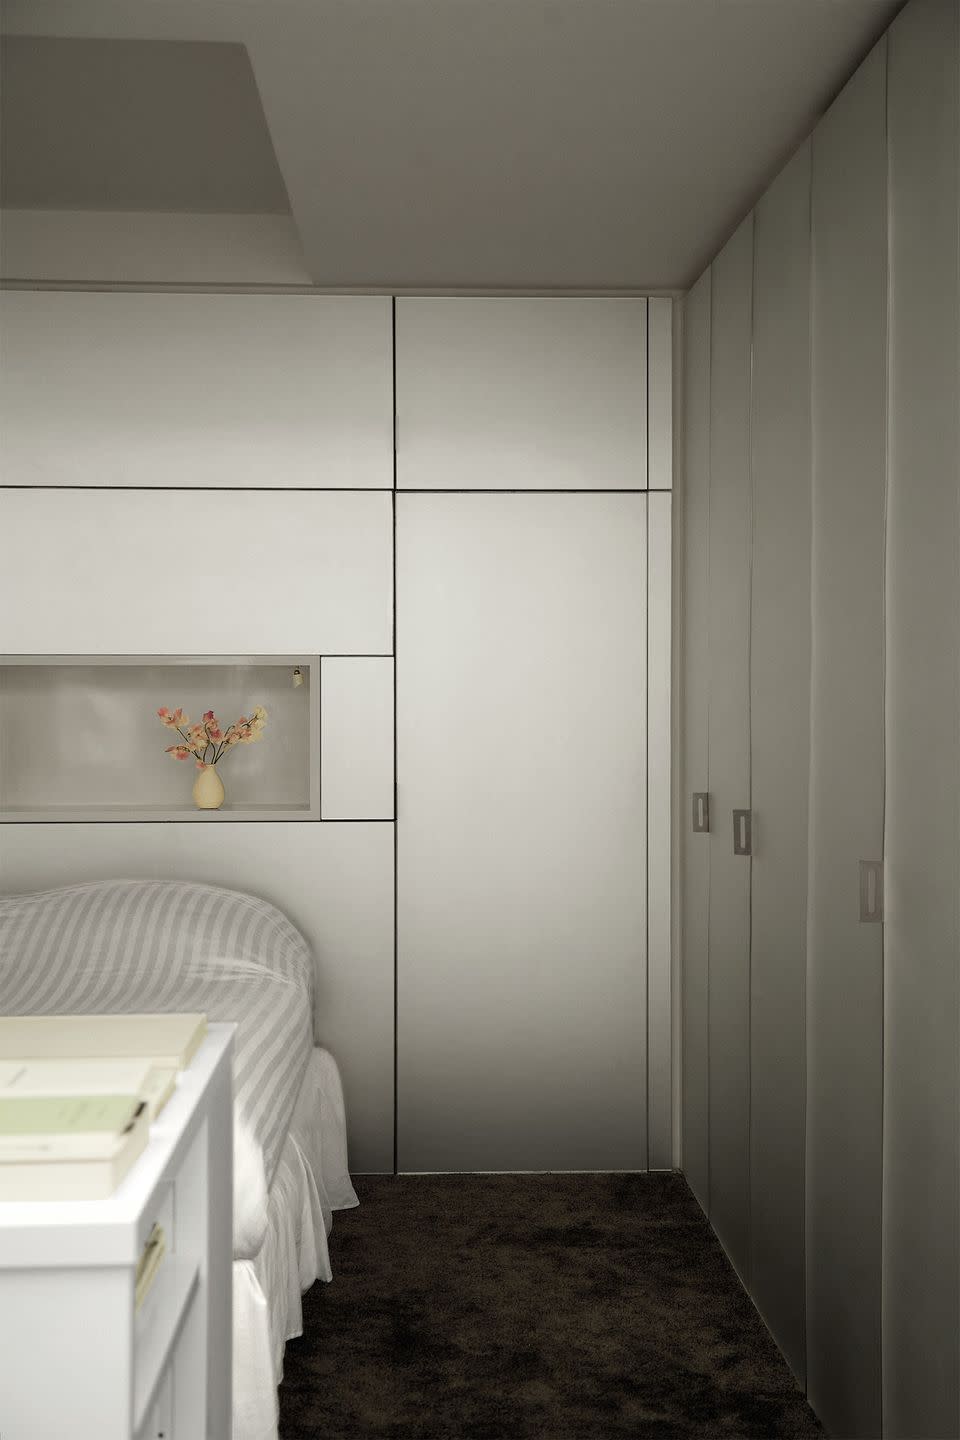 a small bedroom has brushed steel on walls and on storage cabinet doors, a bed with a gray and white striped cover, white shelves at its foot, and an inset shelf above head of bed with a small vase and flowers